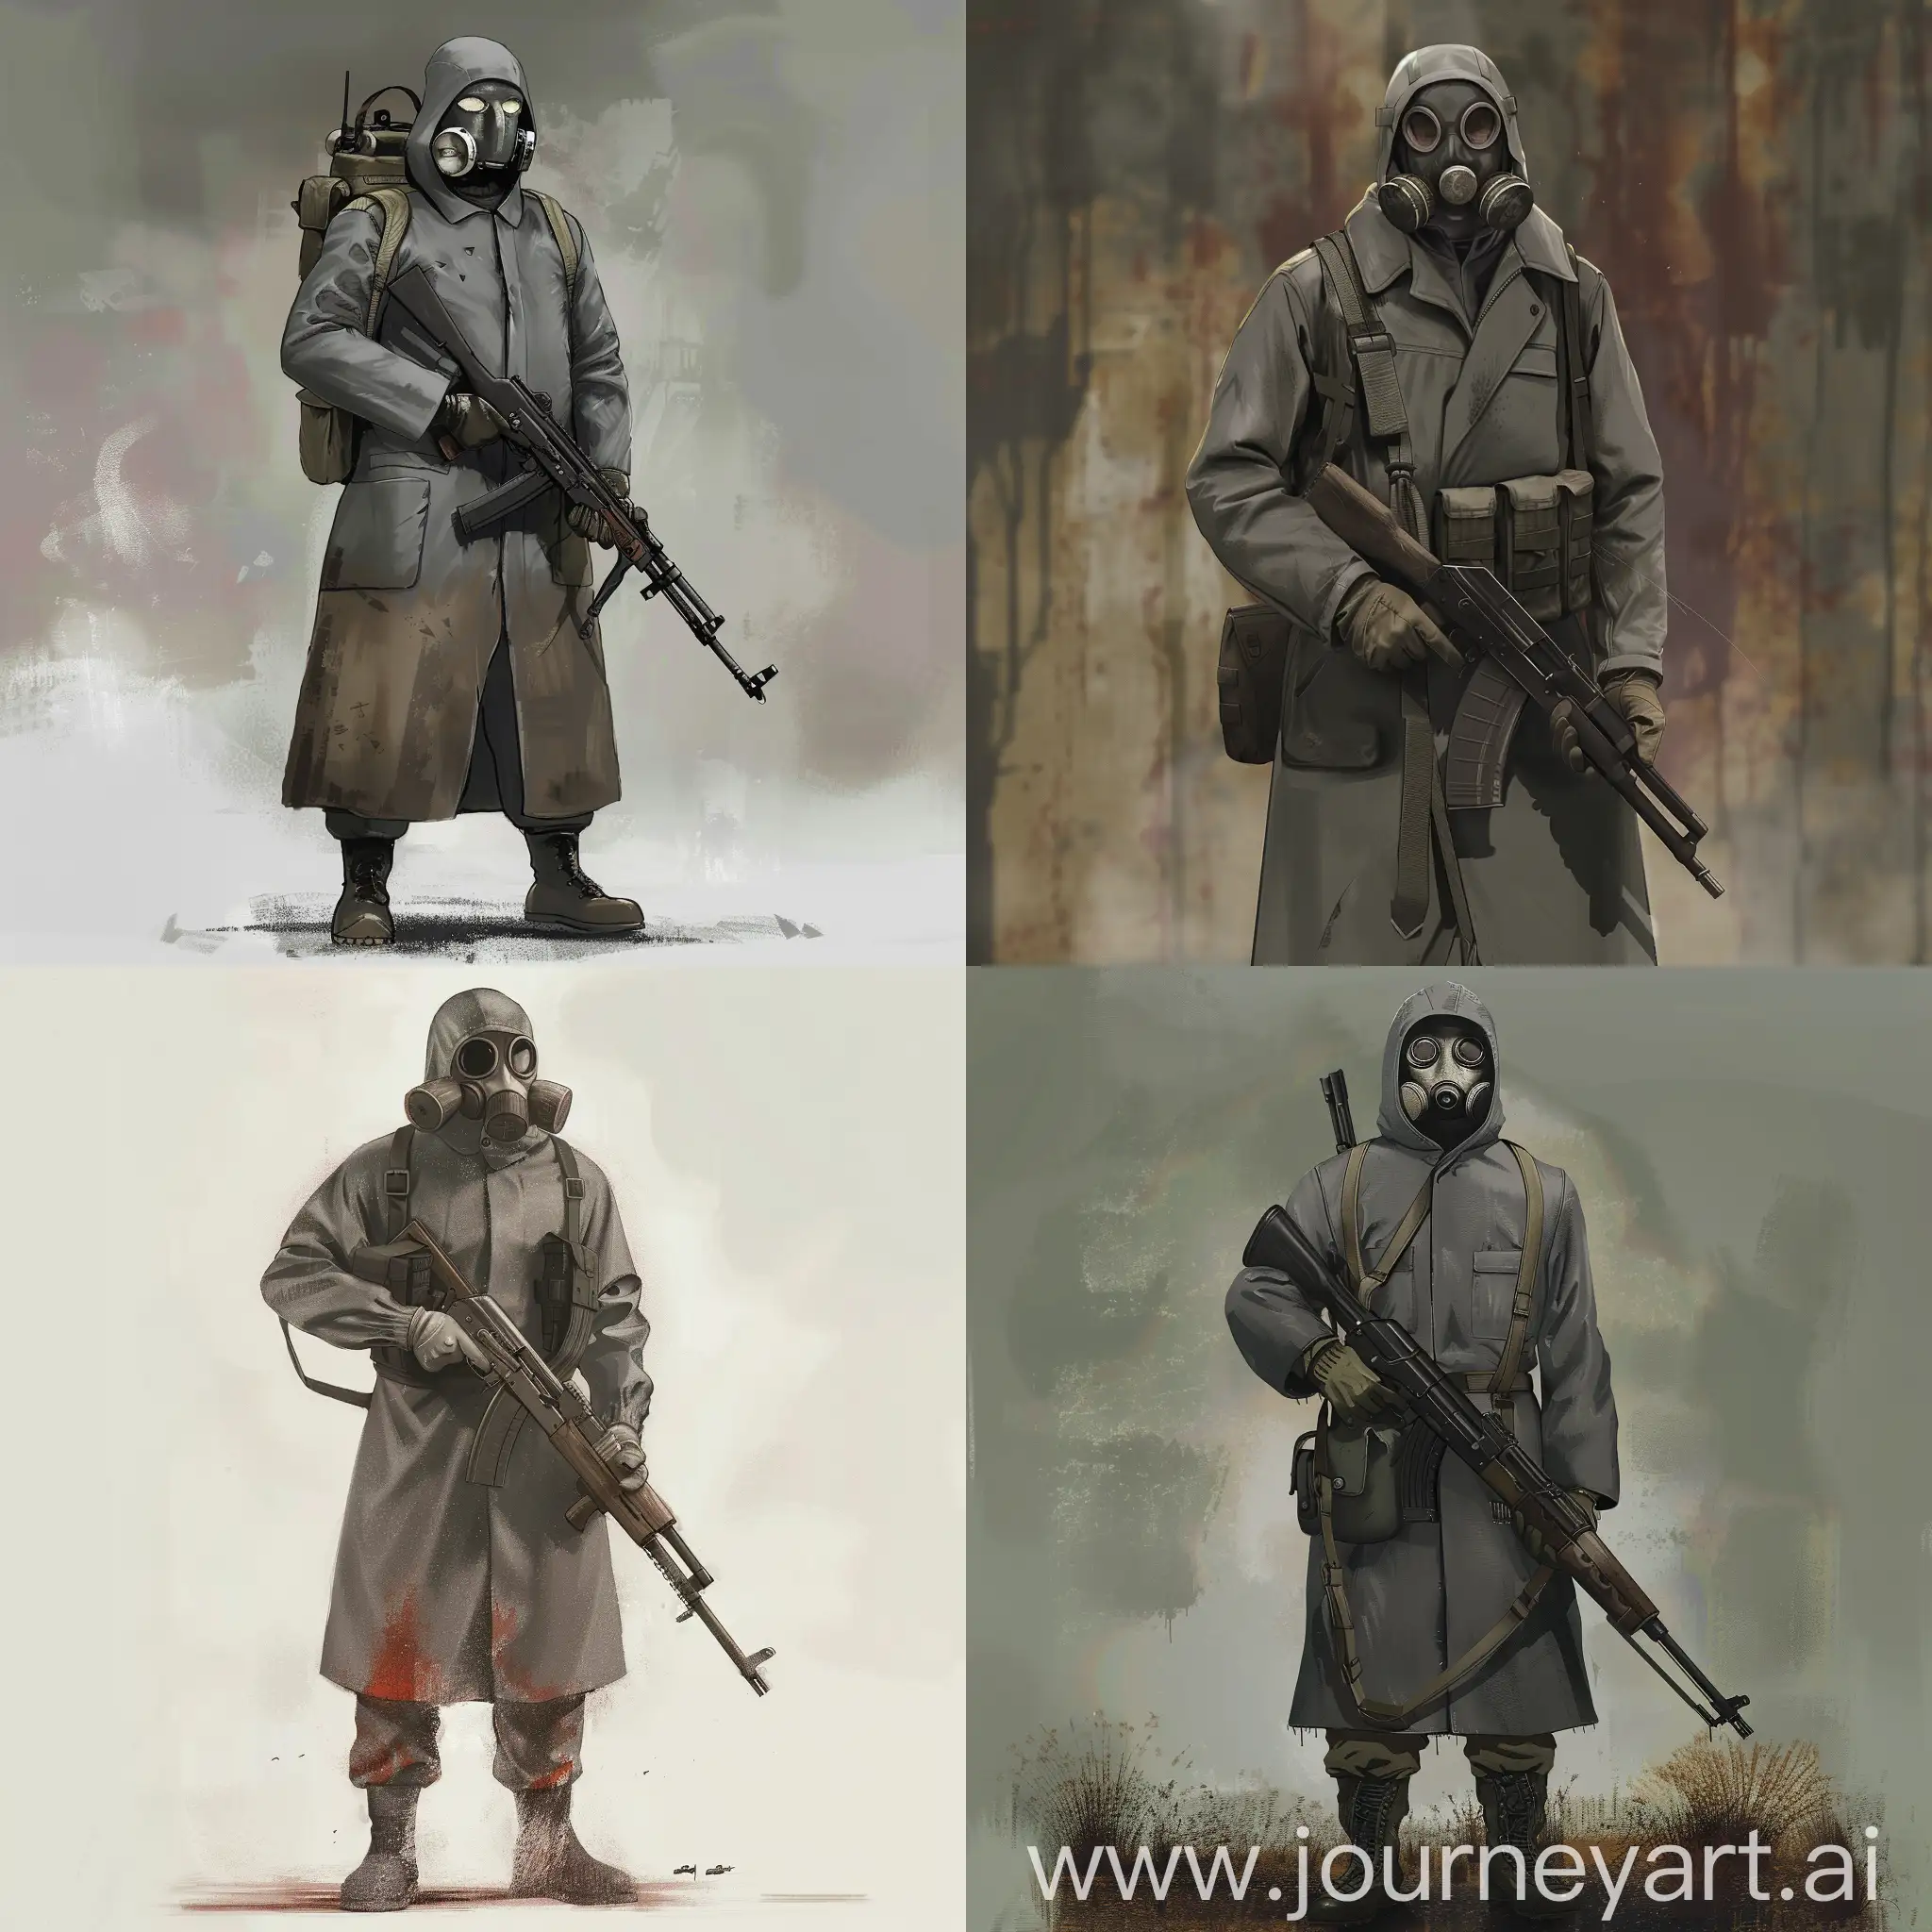 Concept character design art, Ecologist, STALKER game, soviet hazmat suit raincoat, gasmask on his face, military unloading on his body, sniper rifle in his hands.